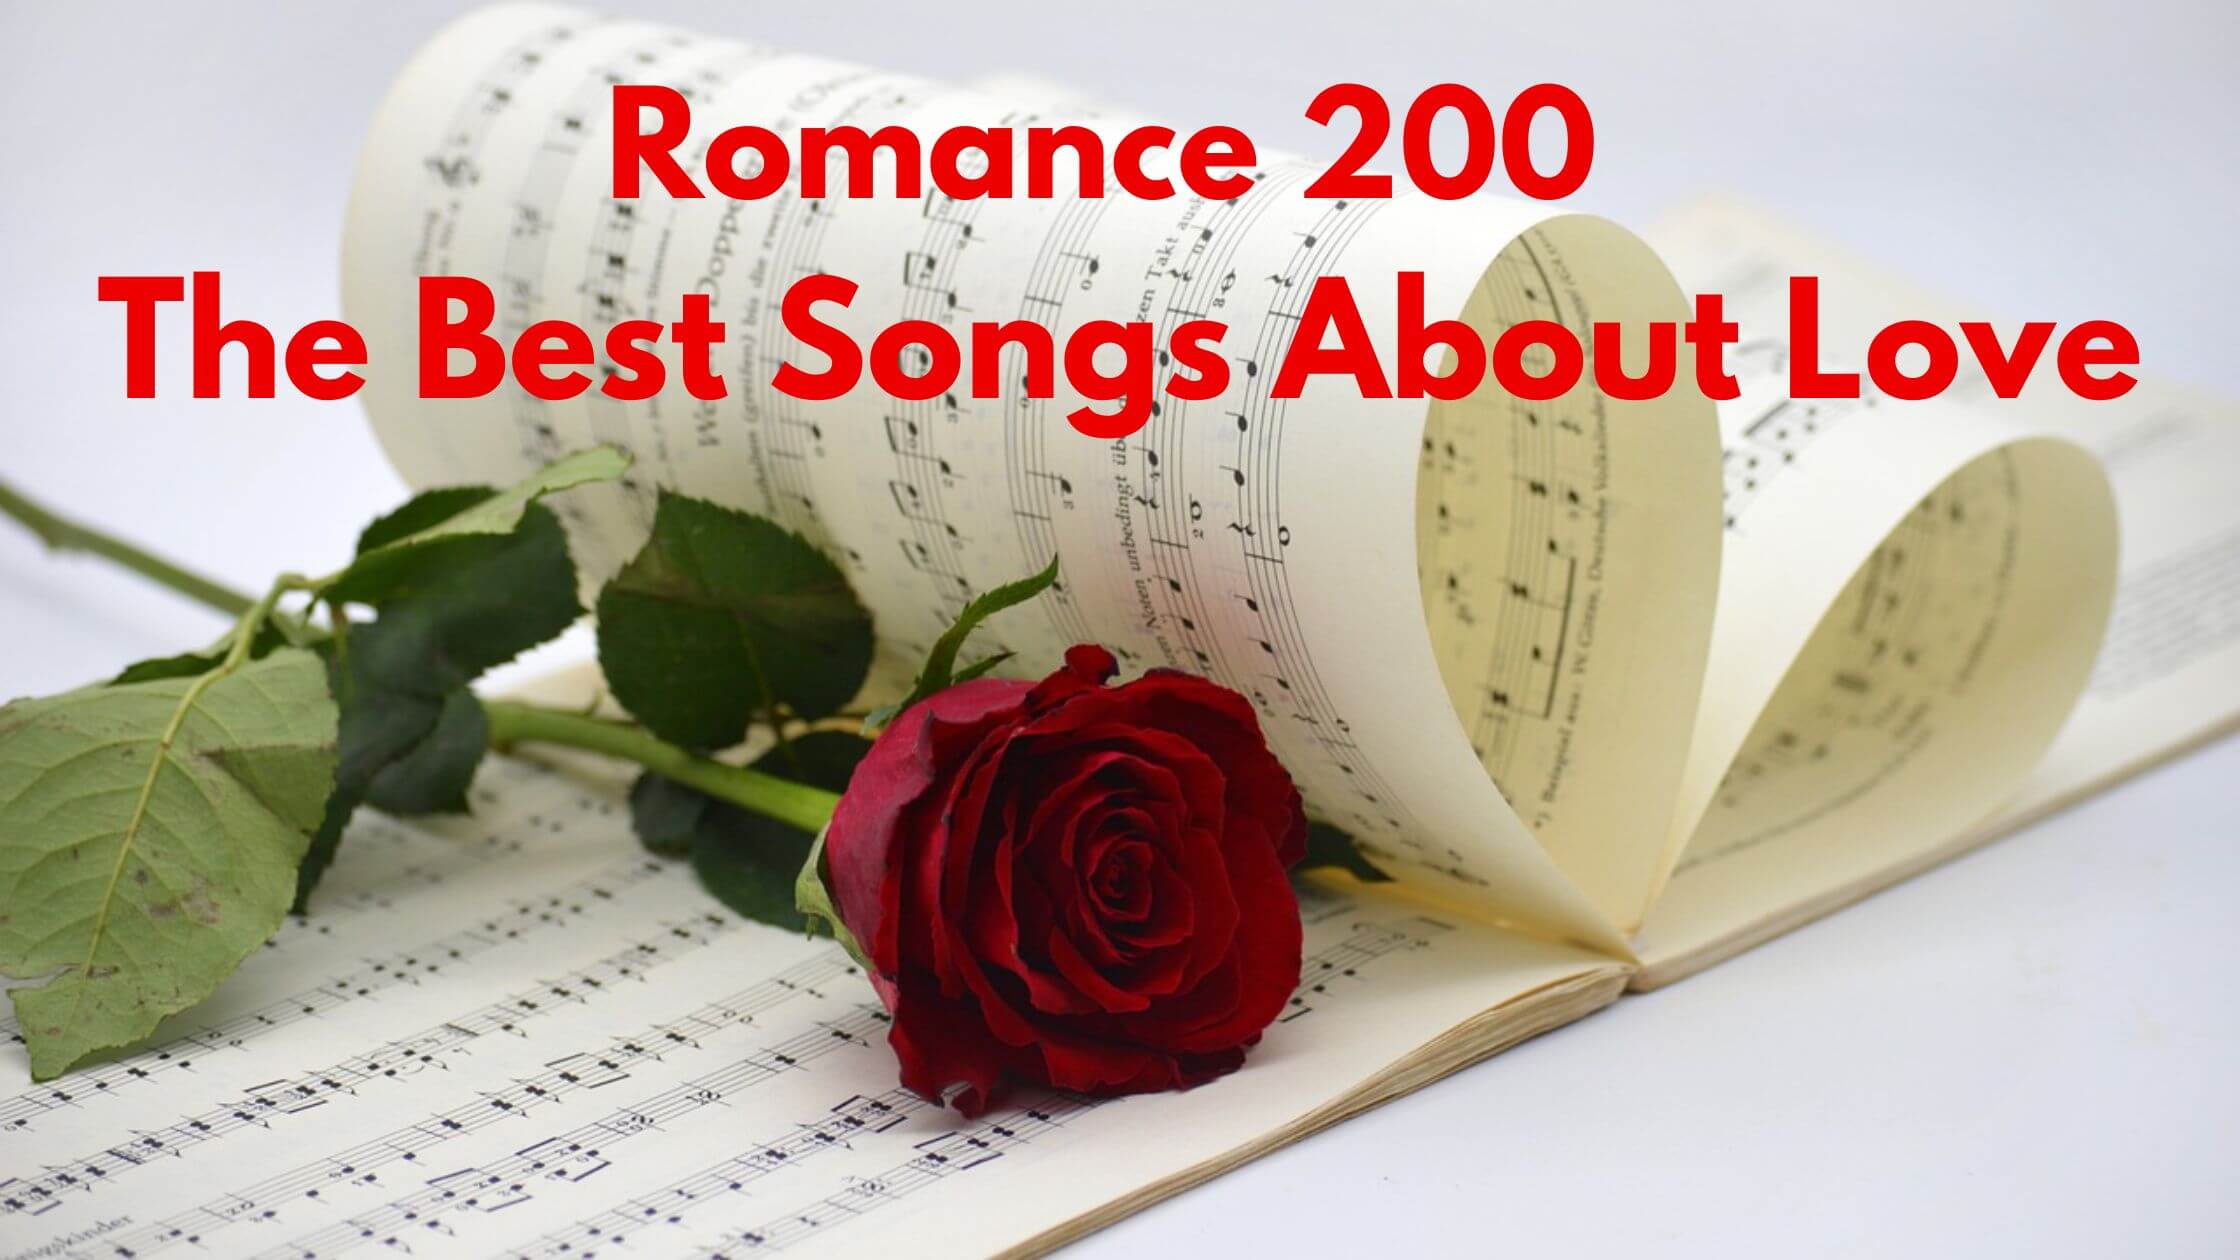 The Best Songs About Love